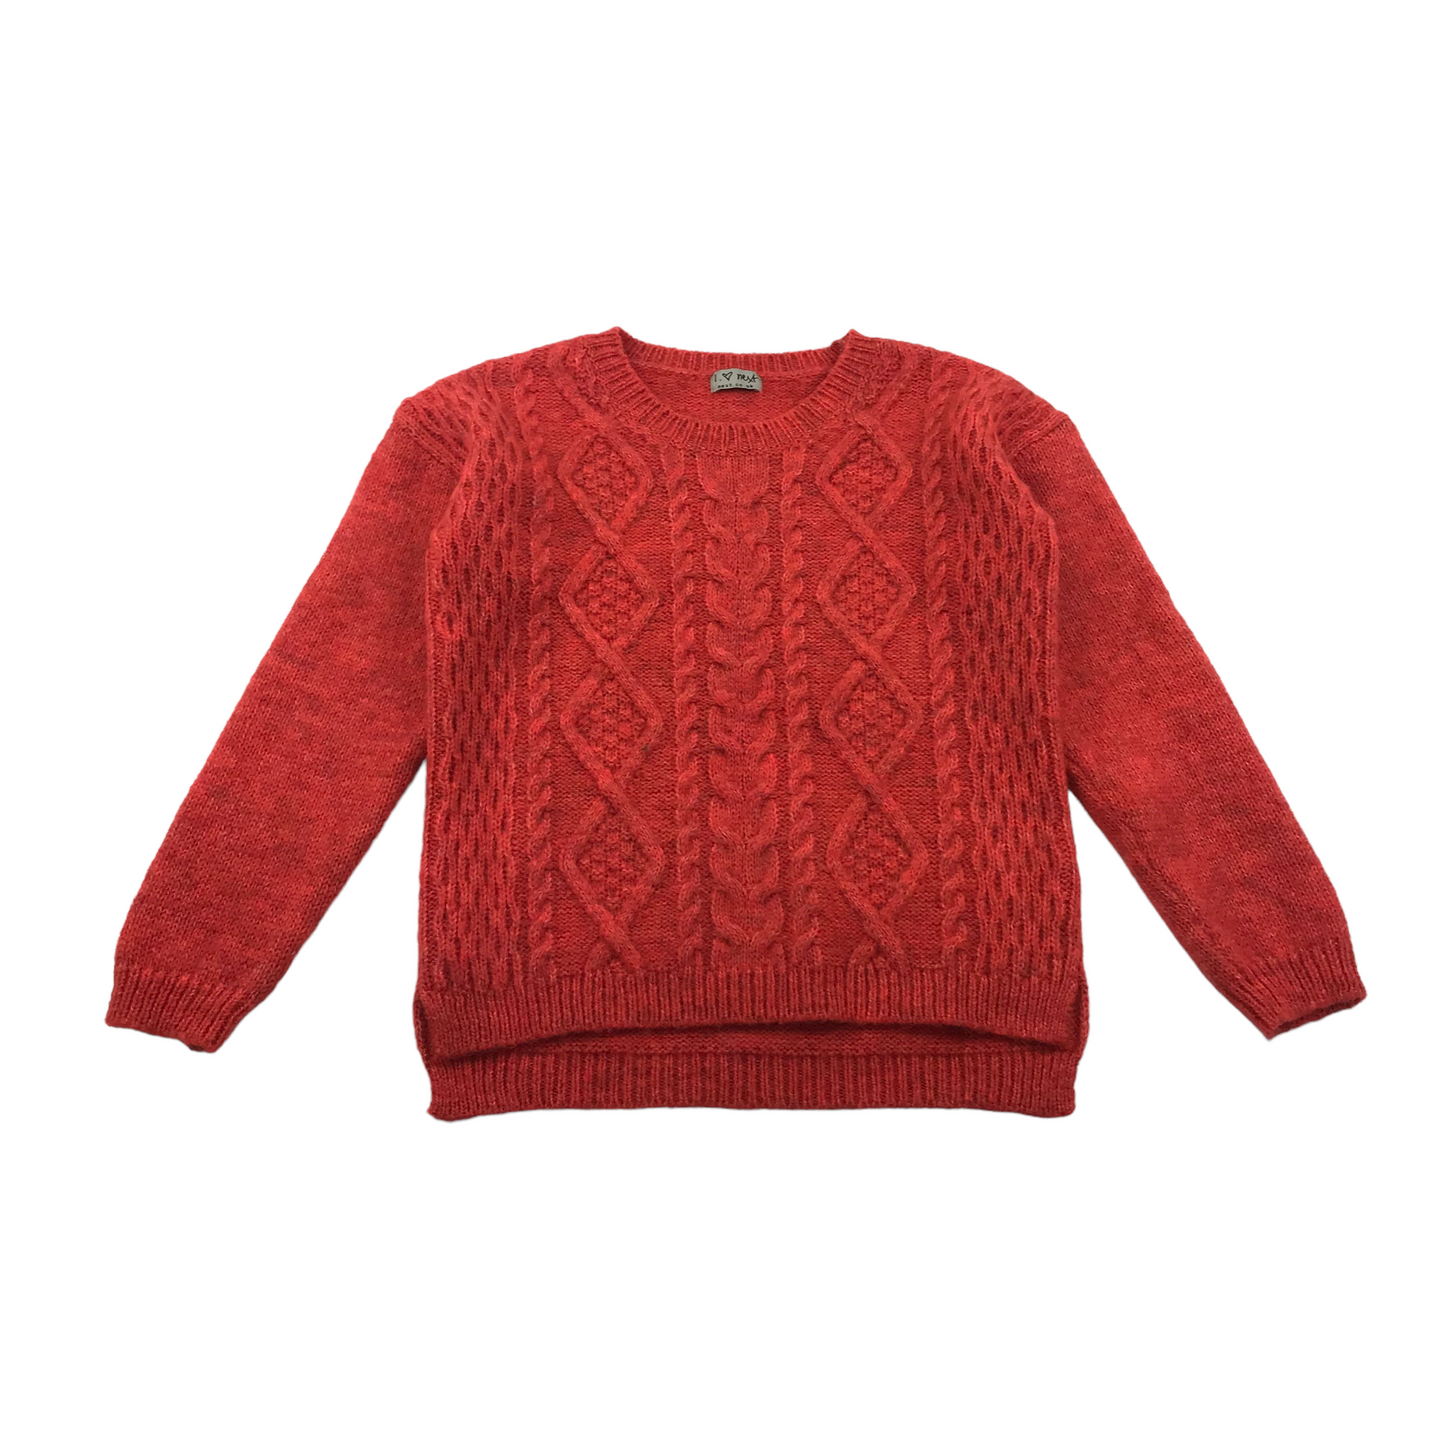 Next Knitted Red Jumper Age 10